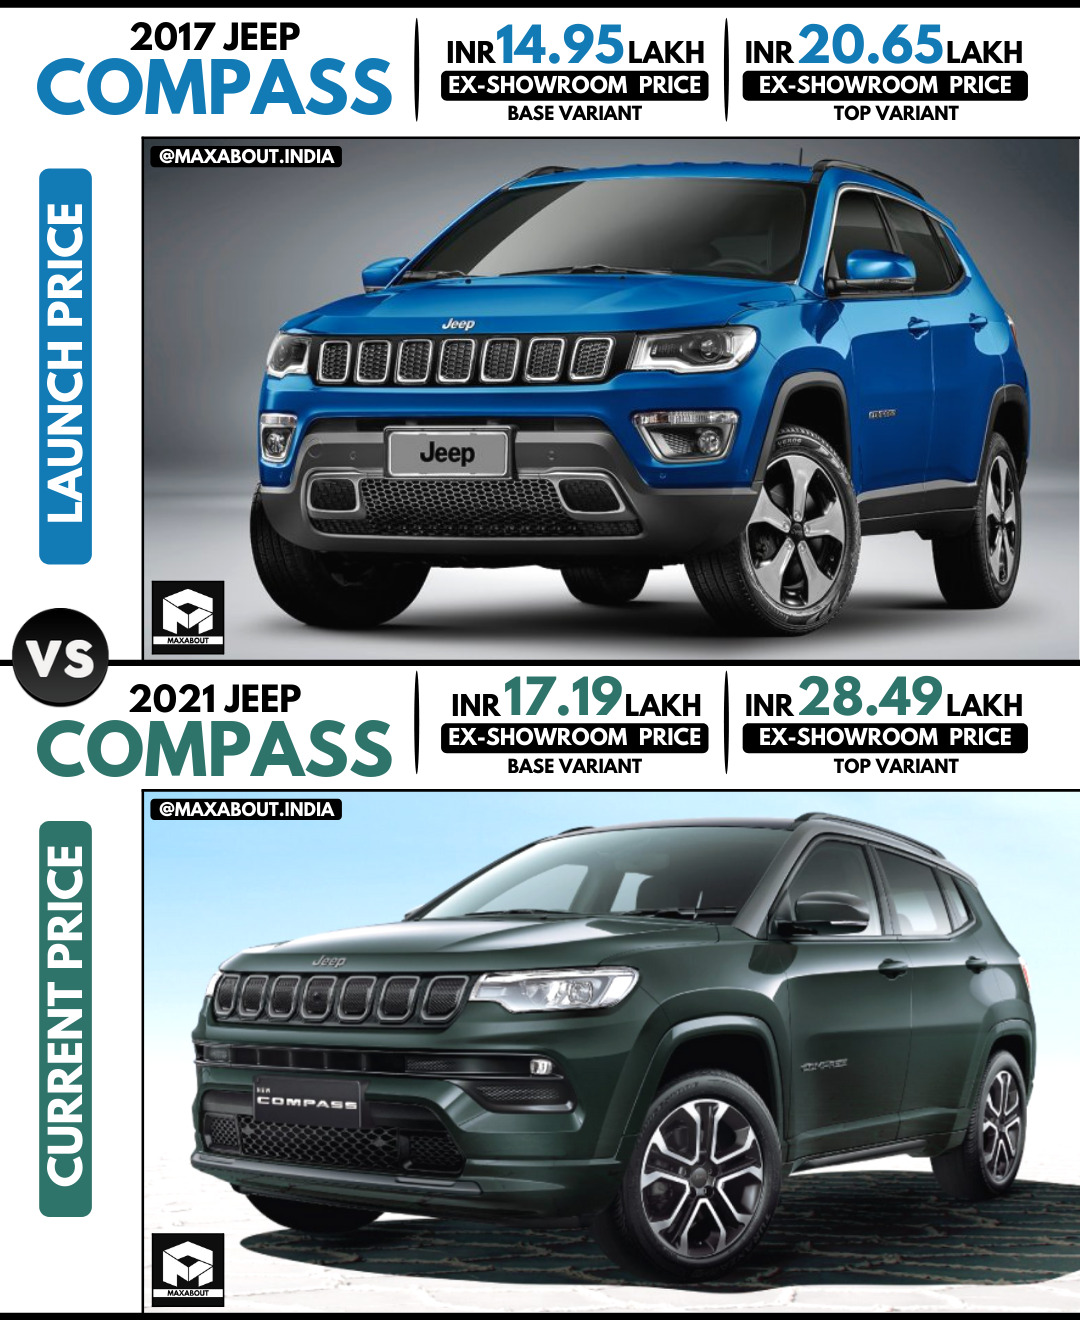 2021 Jeep Compass Launch Price Rs 17 L To Rs 28.3 L - 4 Variants, 11 Trims